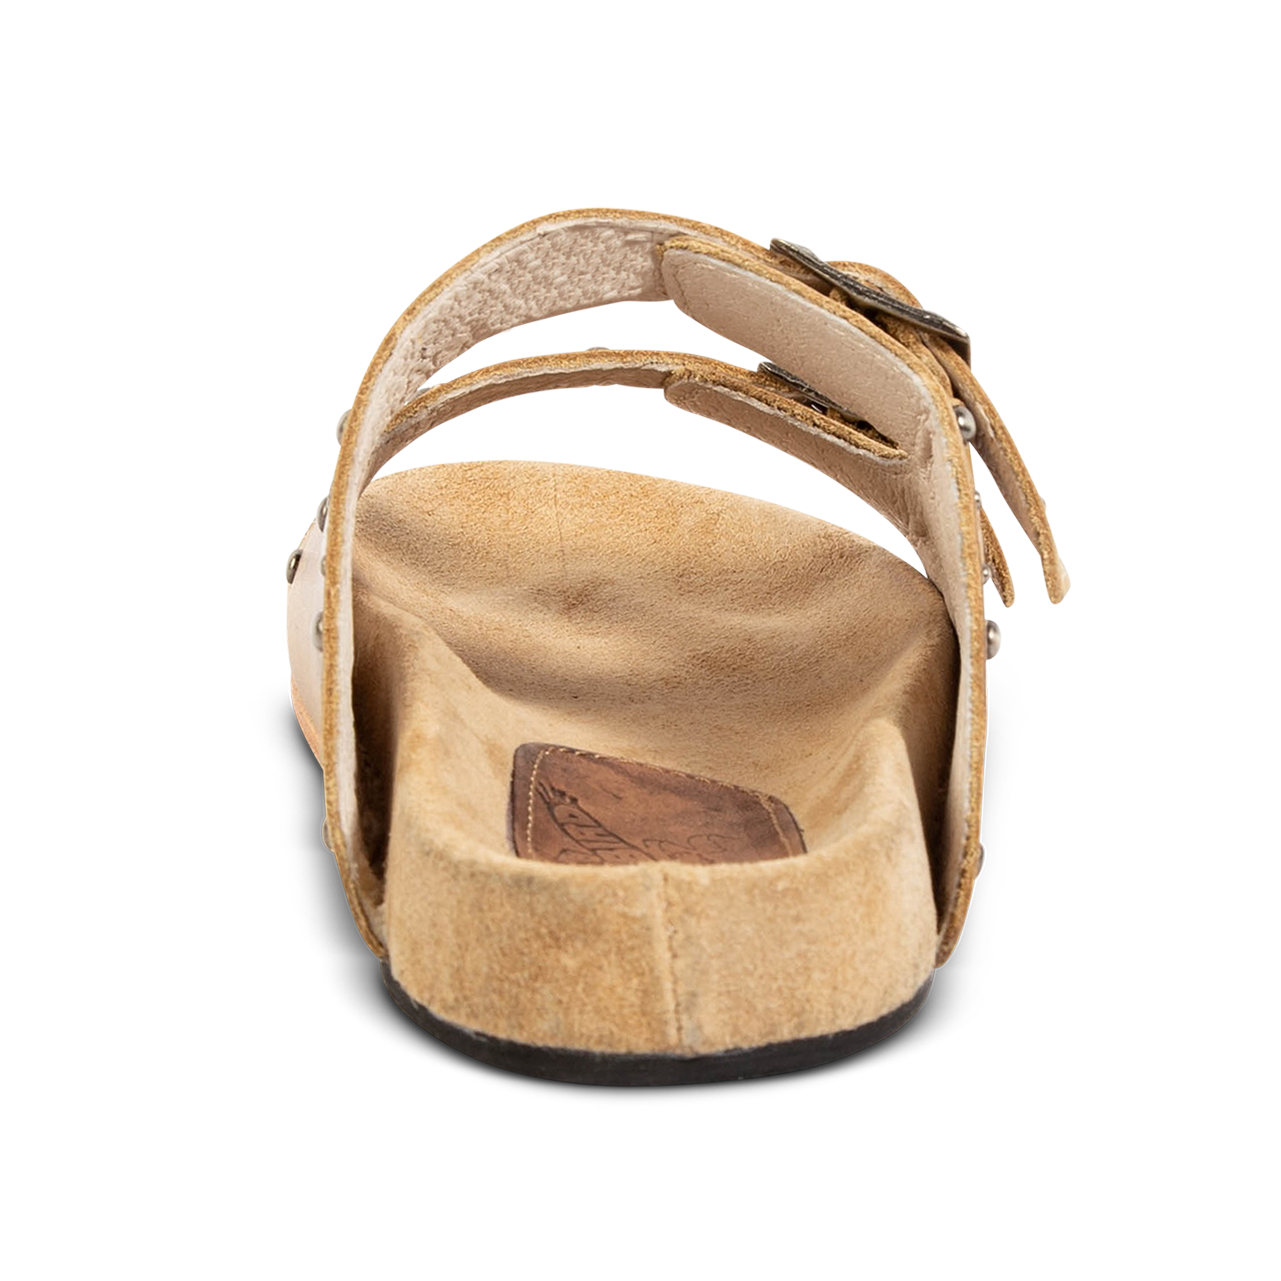 Back view showing FREEBIRD women's Asher natural sandal with adjustable belt buckles, a suede footbed and silver embellishments